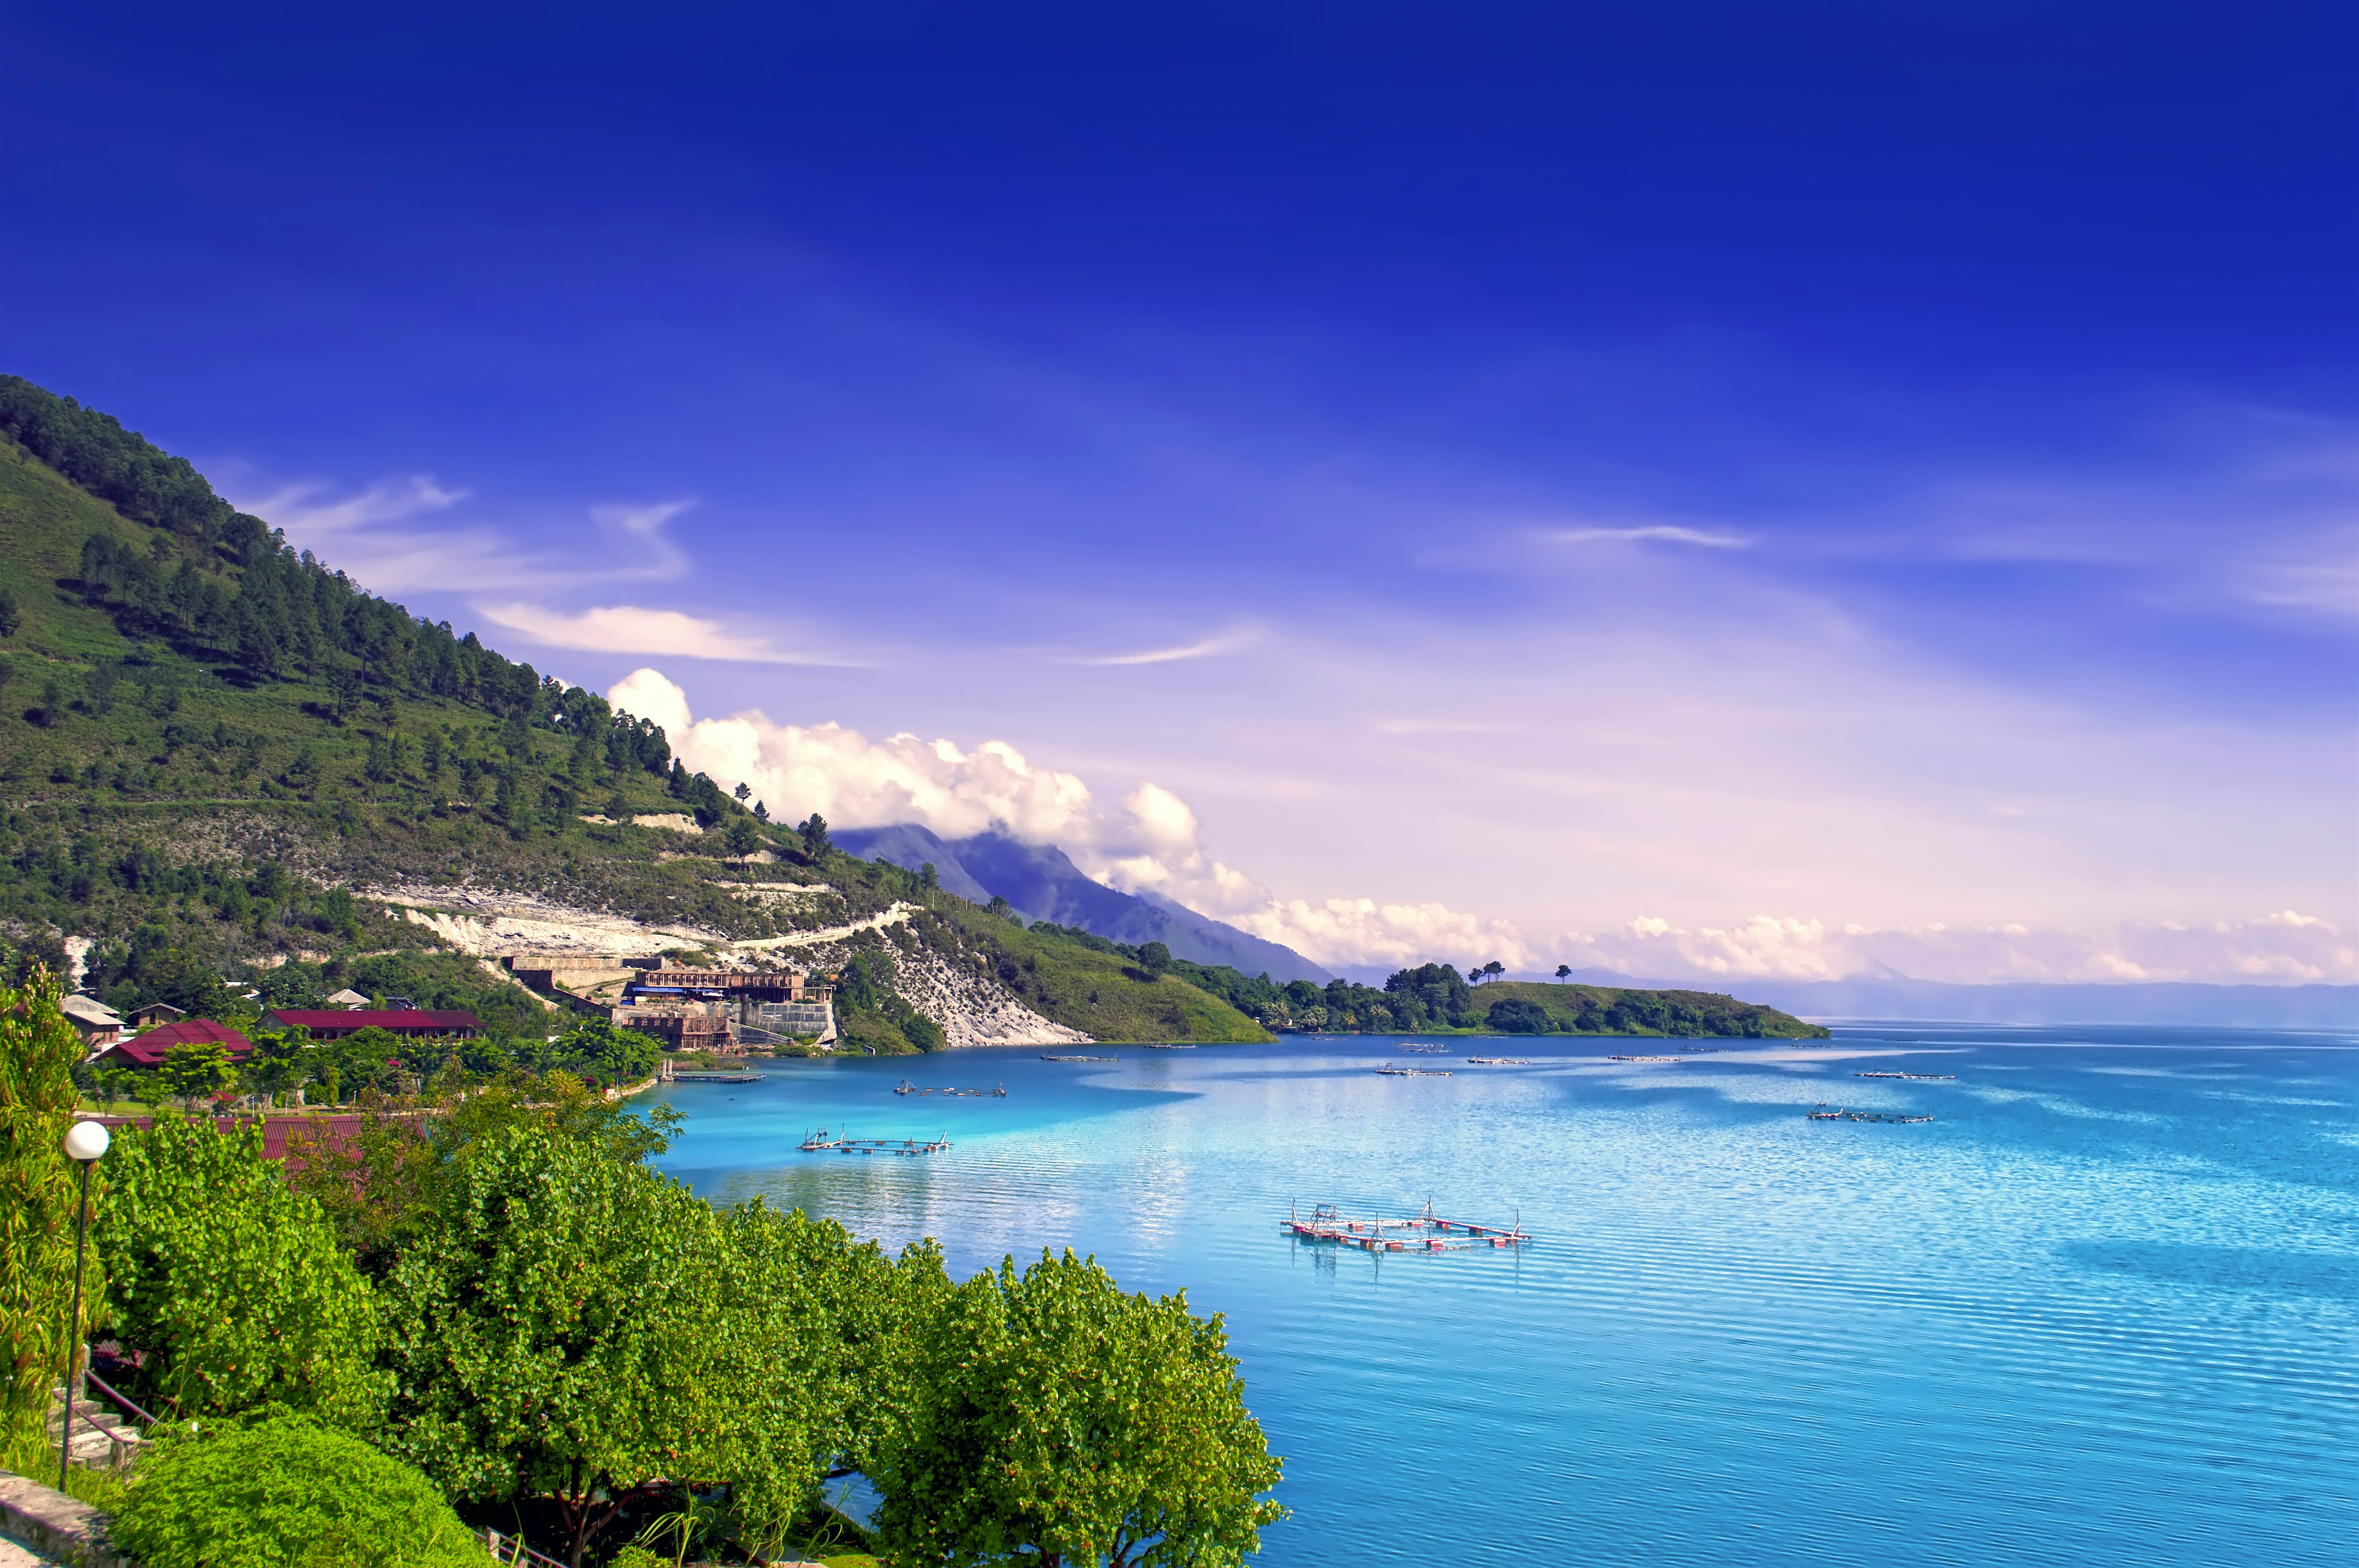  The image shows a beautiful view of Danau Toba, a large volcanic lake in Sumatra, Indonesia. The lake is surrounded by green hills and mountains, and the water is crystal clear.